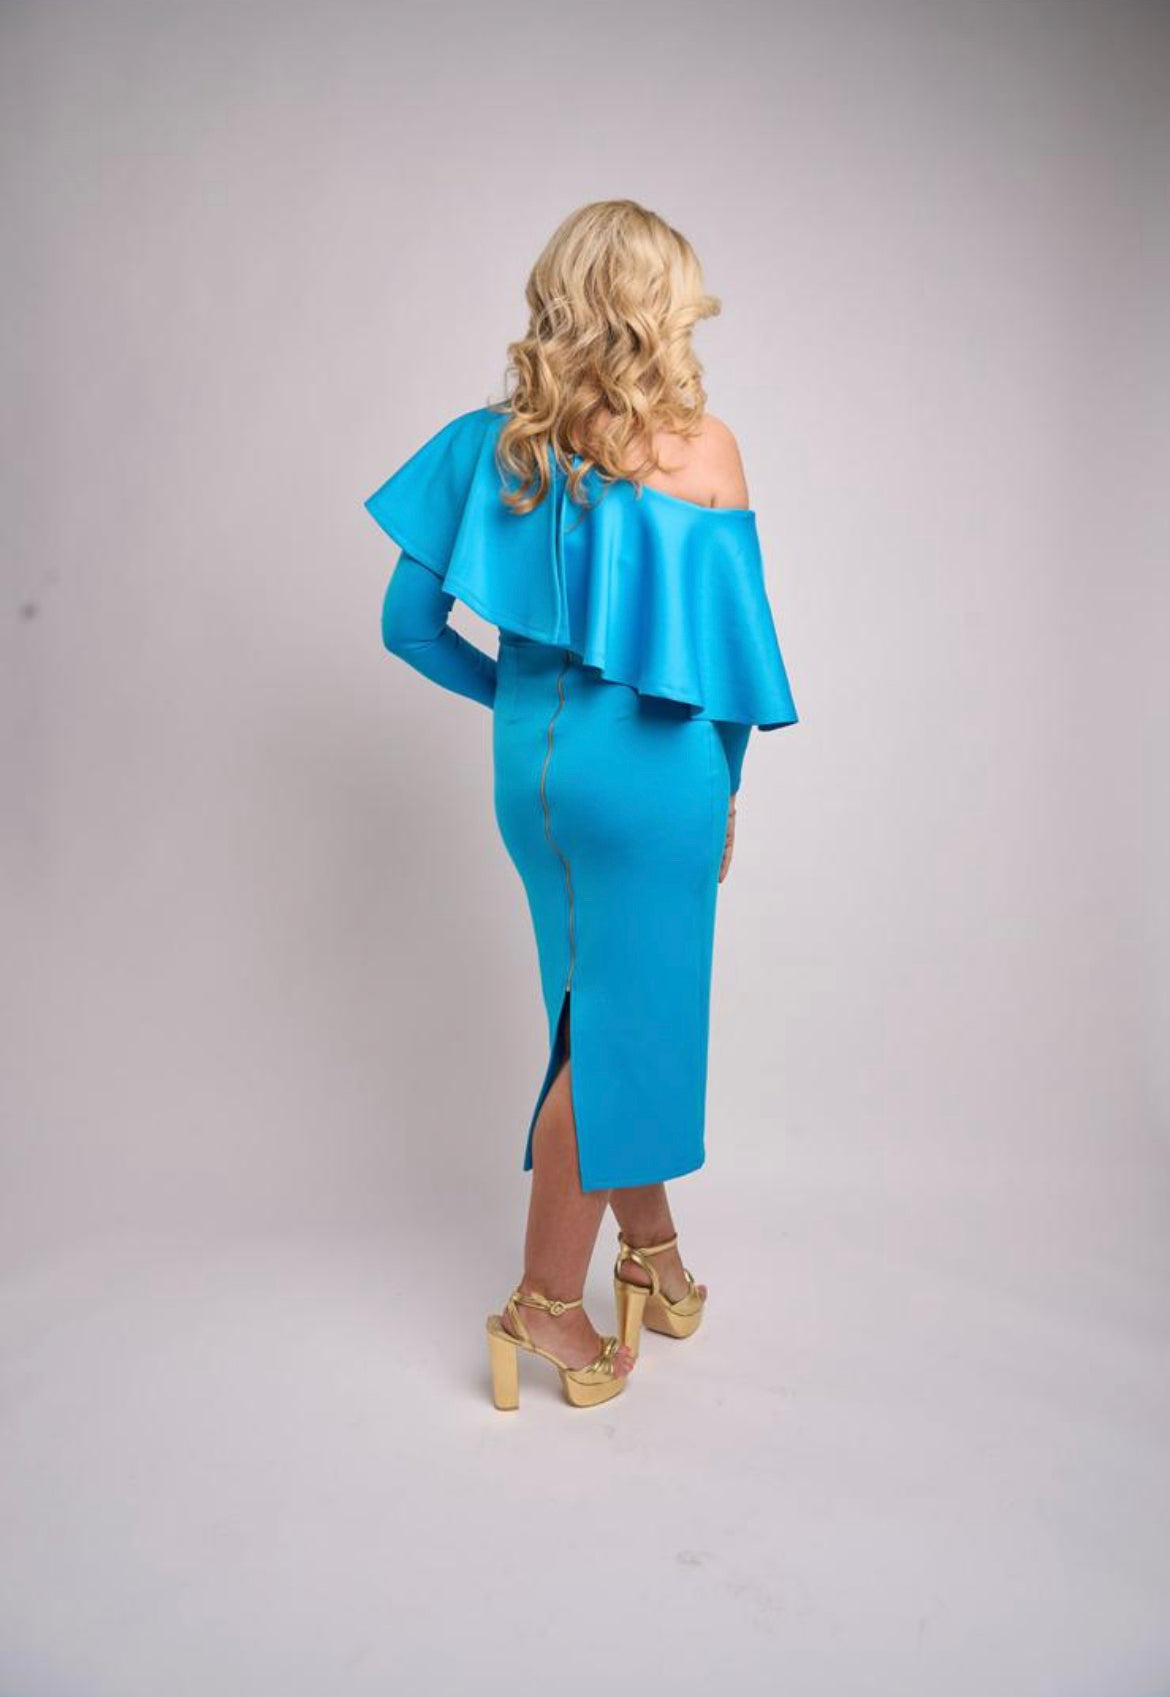 The Leanne Campbell Ophelia Blue Frill Front Midi Dress